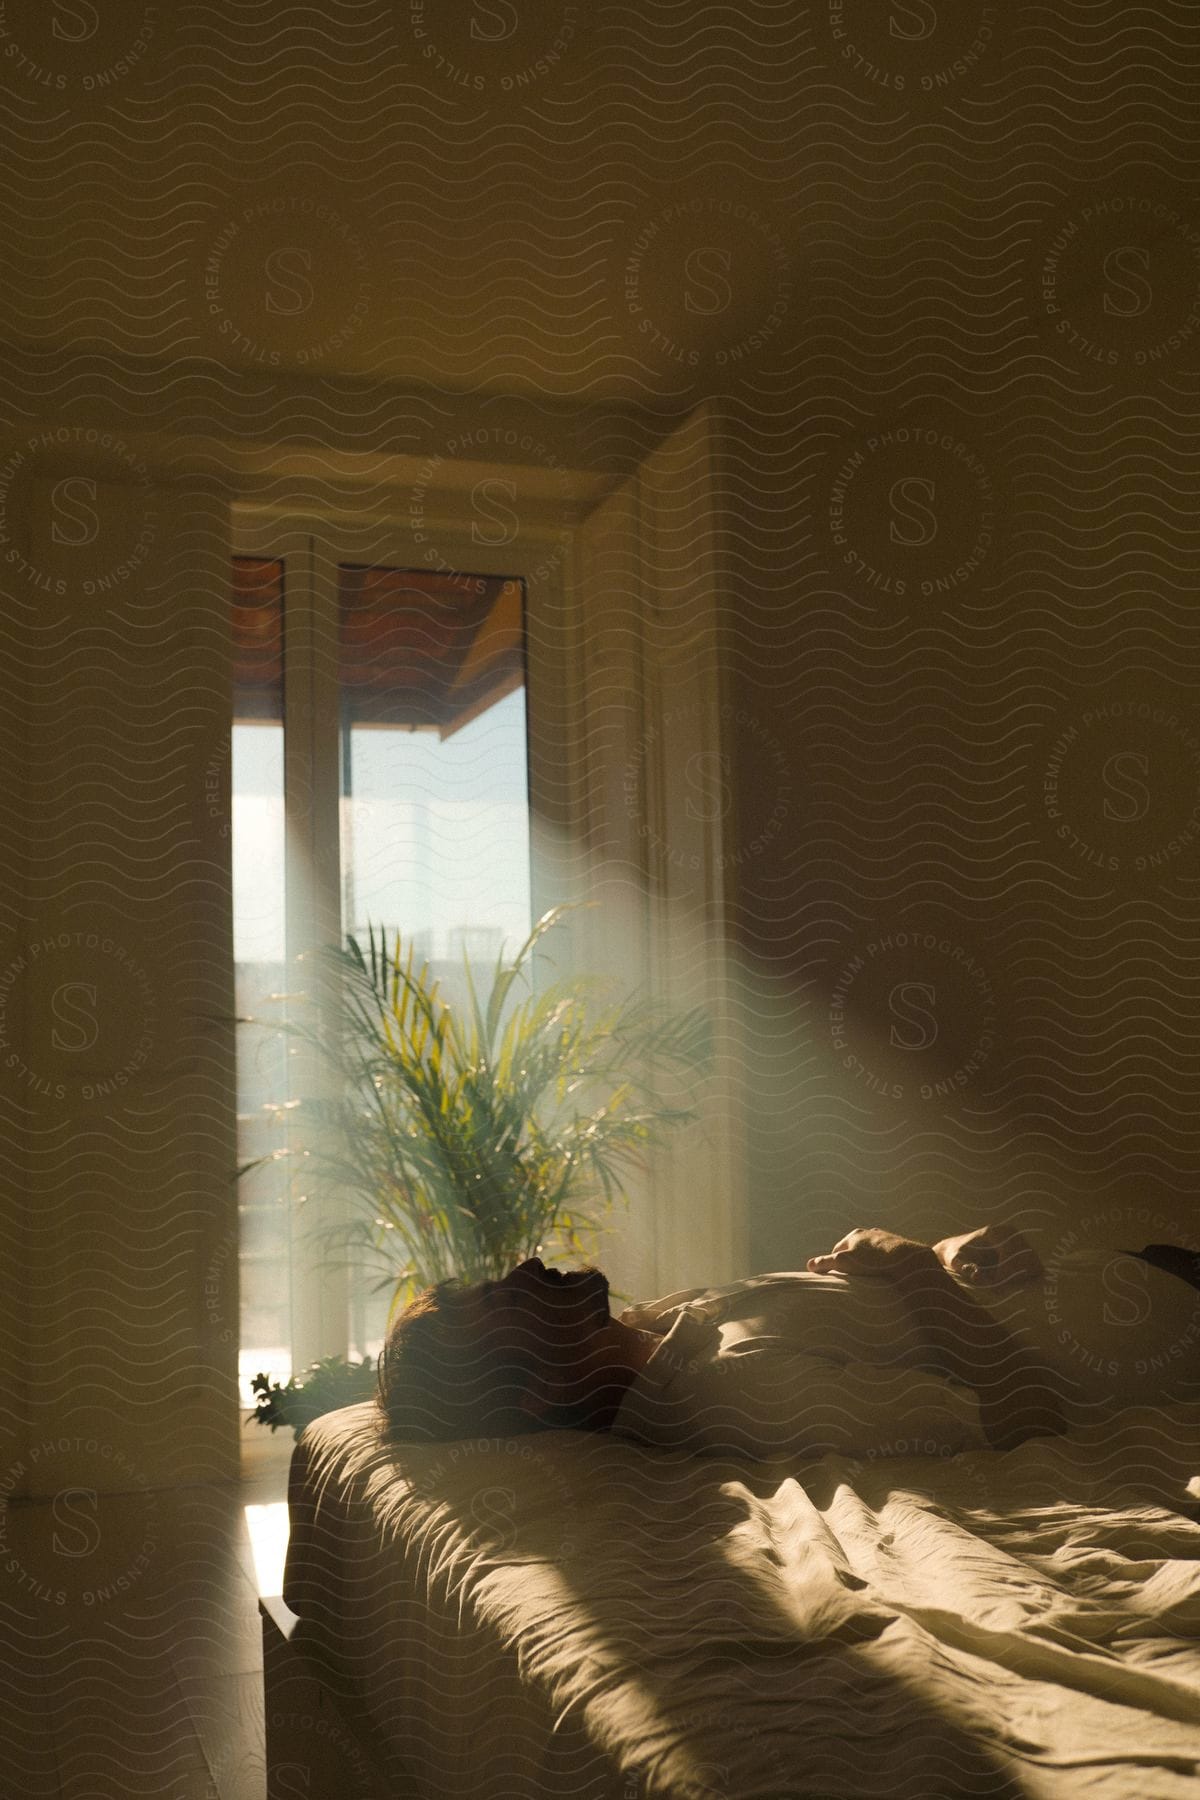 Stock photo of a man rests on a bed as sunlight enters through the windows at dawn in an interior space